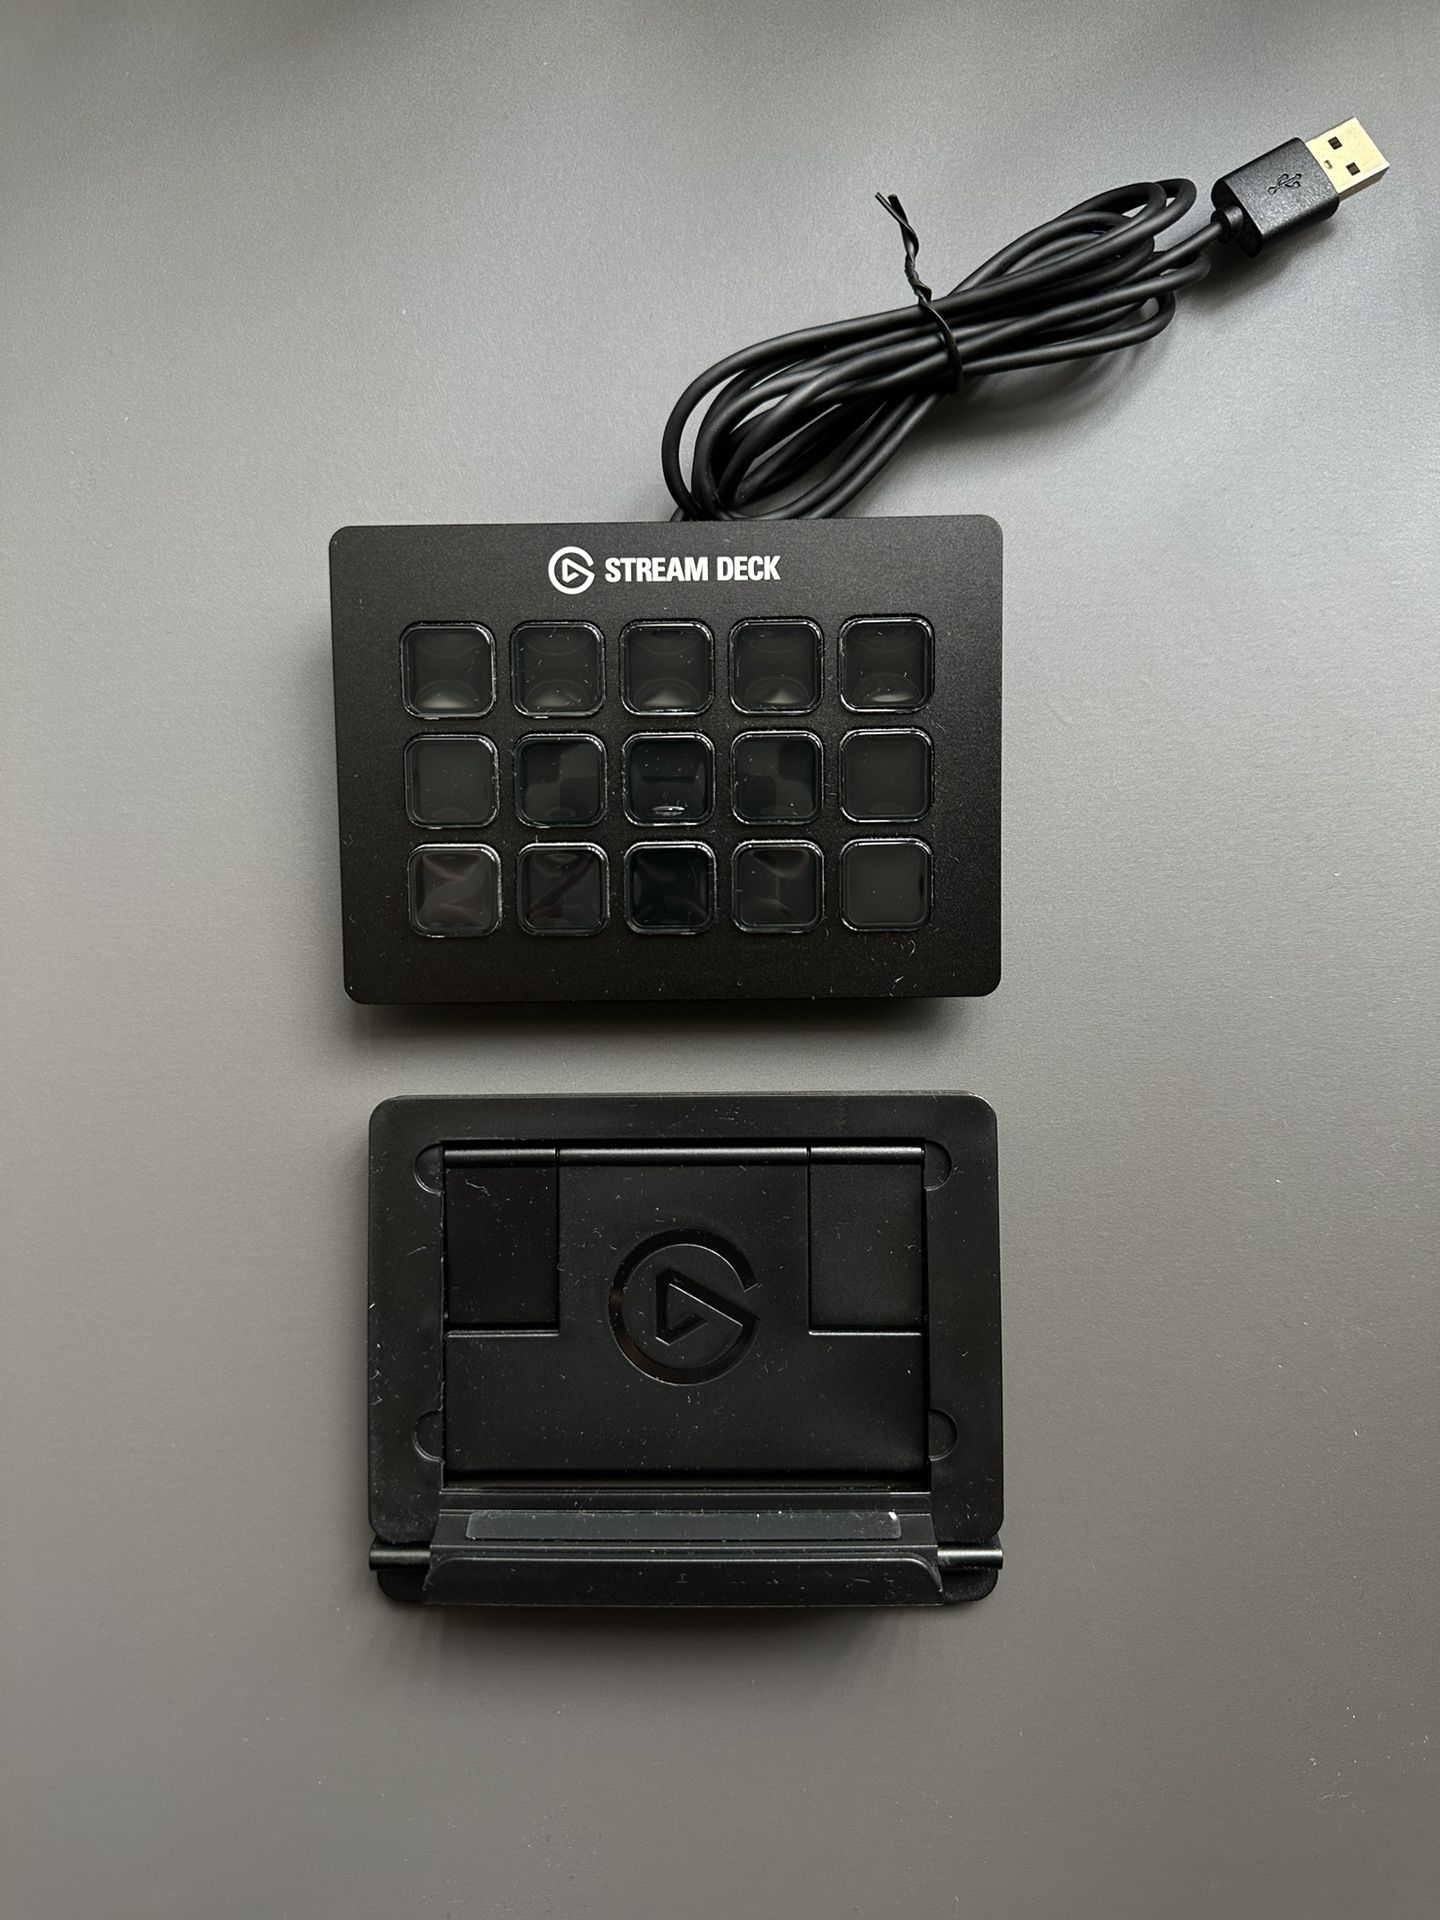 Elgato Stream Deck Classic With 15 Customizable LCD Keys. for 